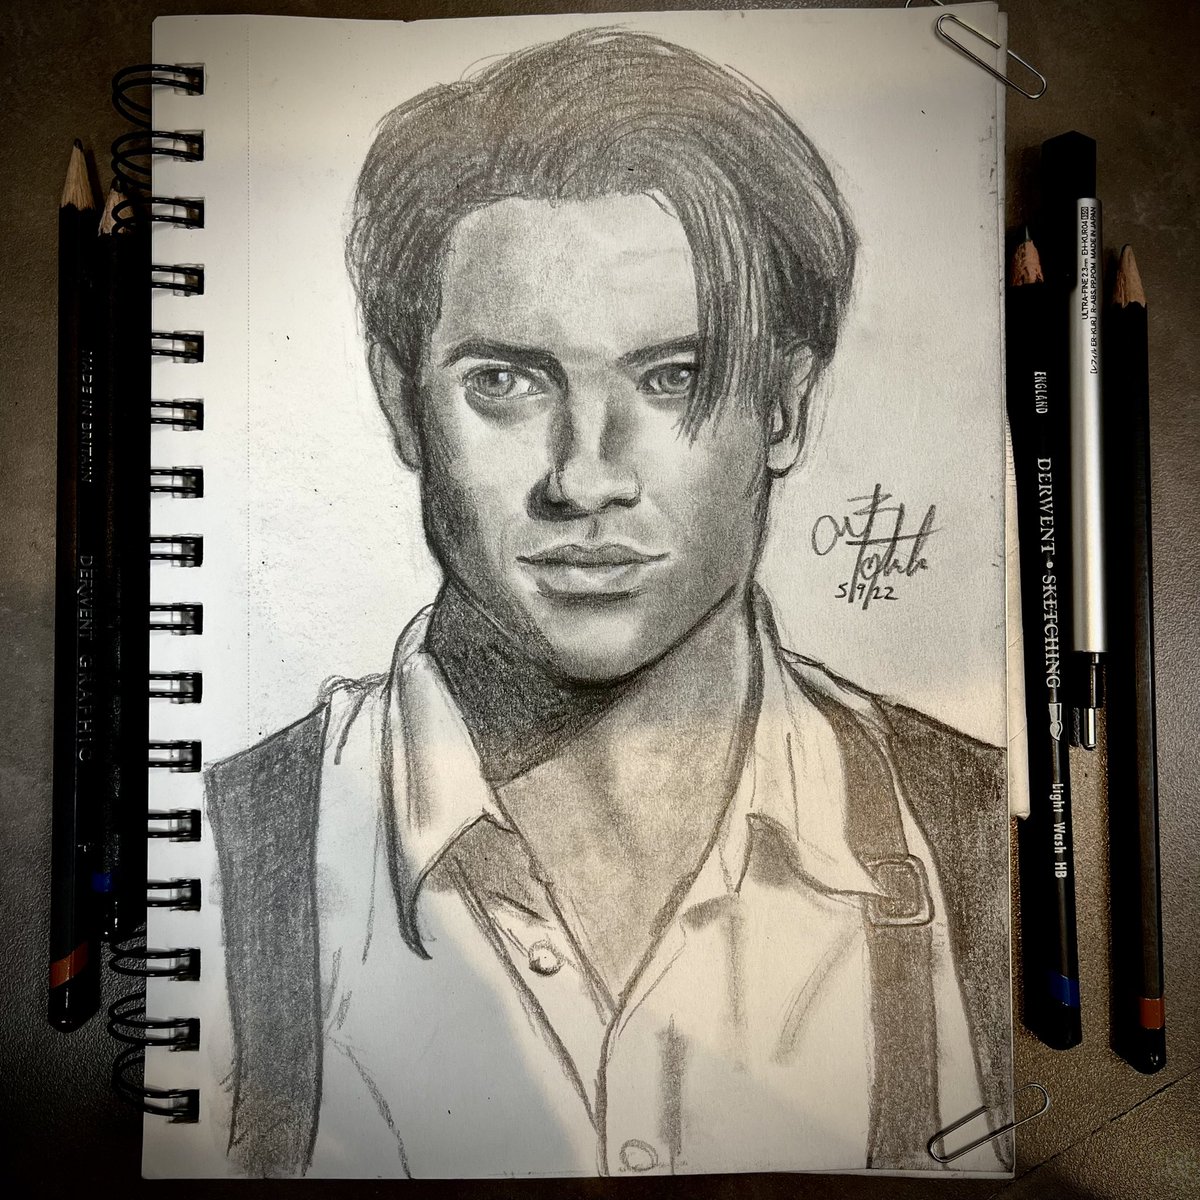 Rick from the Mummy ❤️✏️
#BrendanFraser #TheMummy #RickOConnell #art #drawing #sketch #workdoodle #pencilart #Pencildrawing